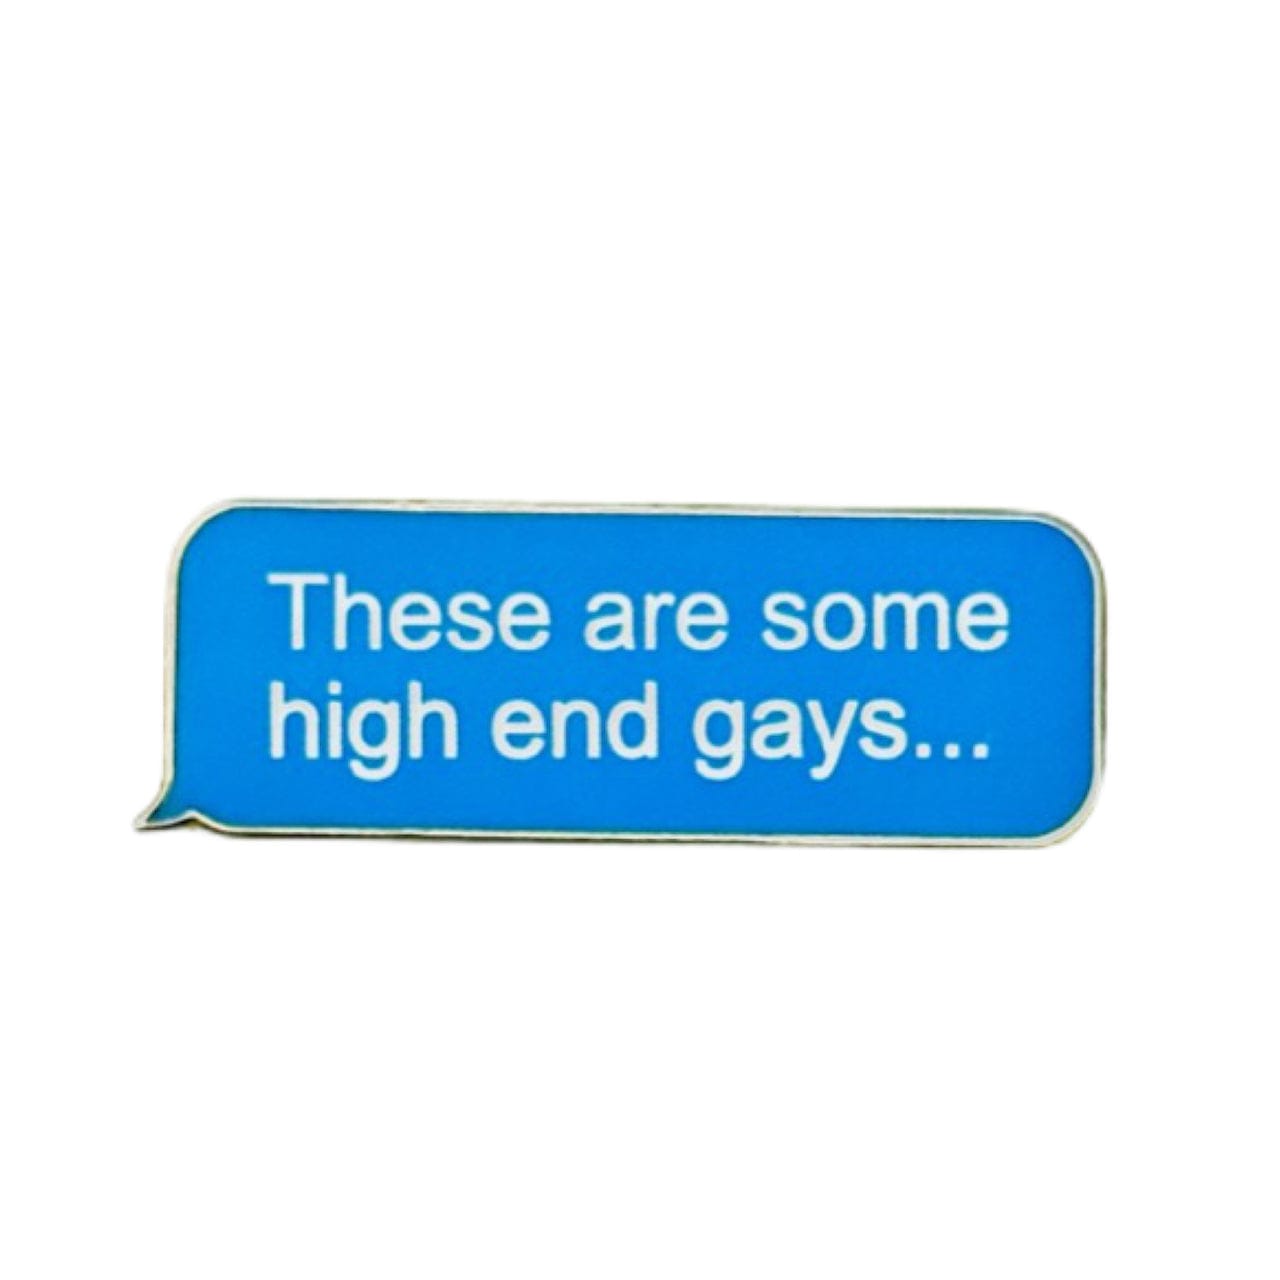 Pinbuds Enamel pin These are some high end gays pin (Jennifer coolidge quote in White lotus)